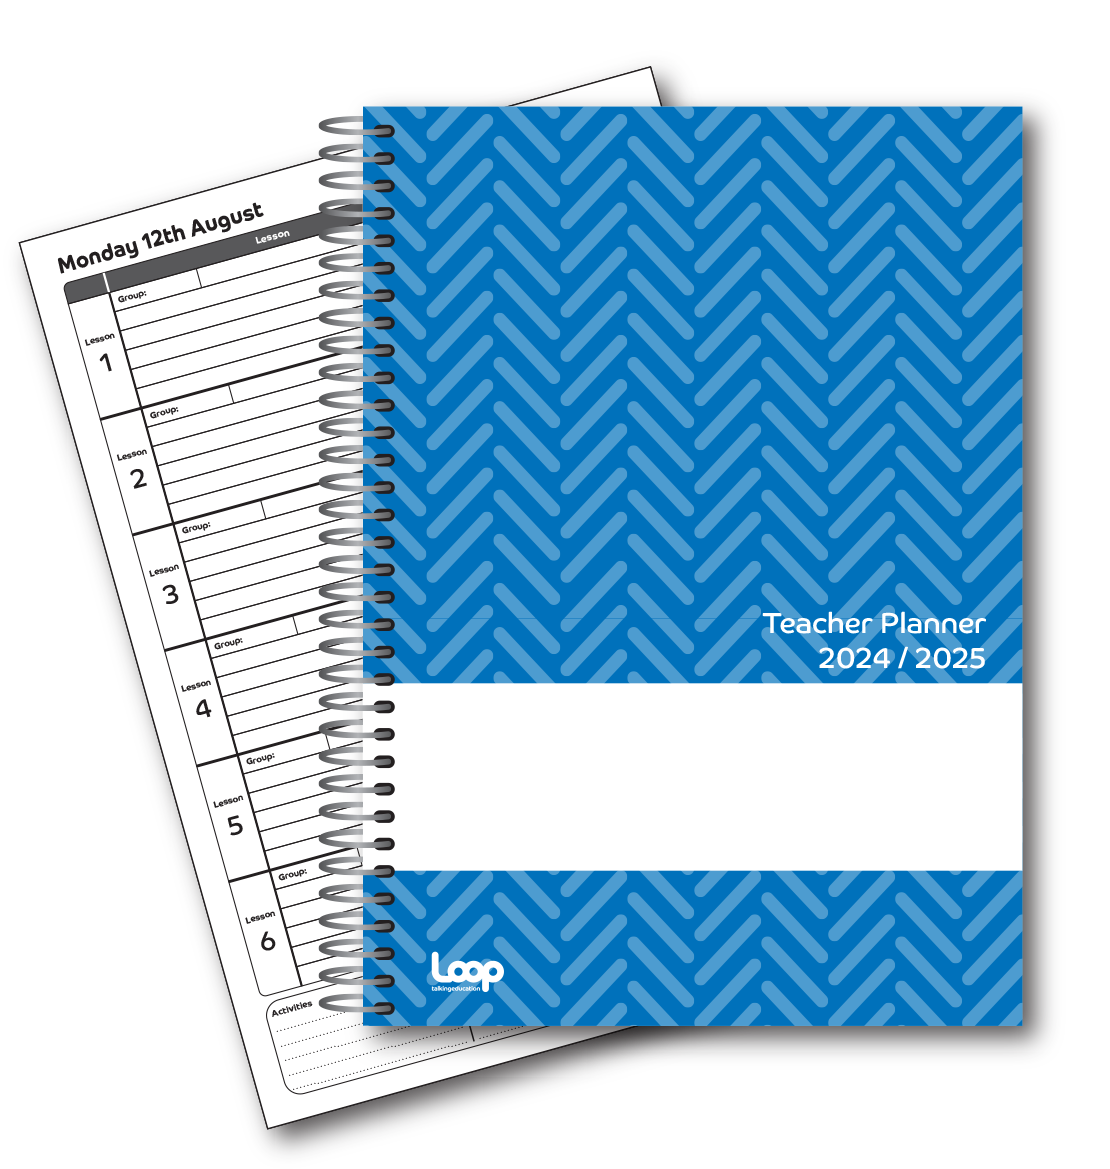 6 Lesson Dated Teacher Planner A4 size